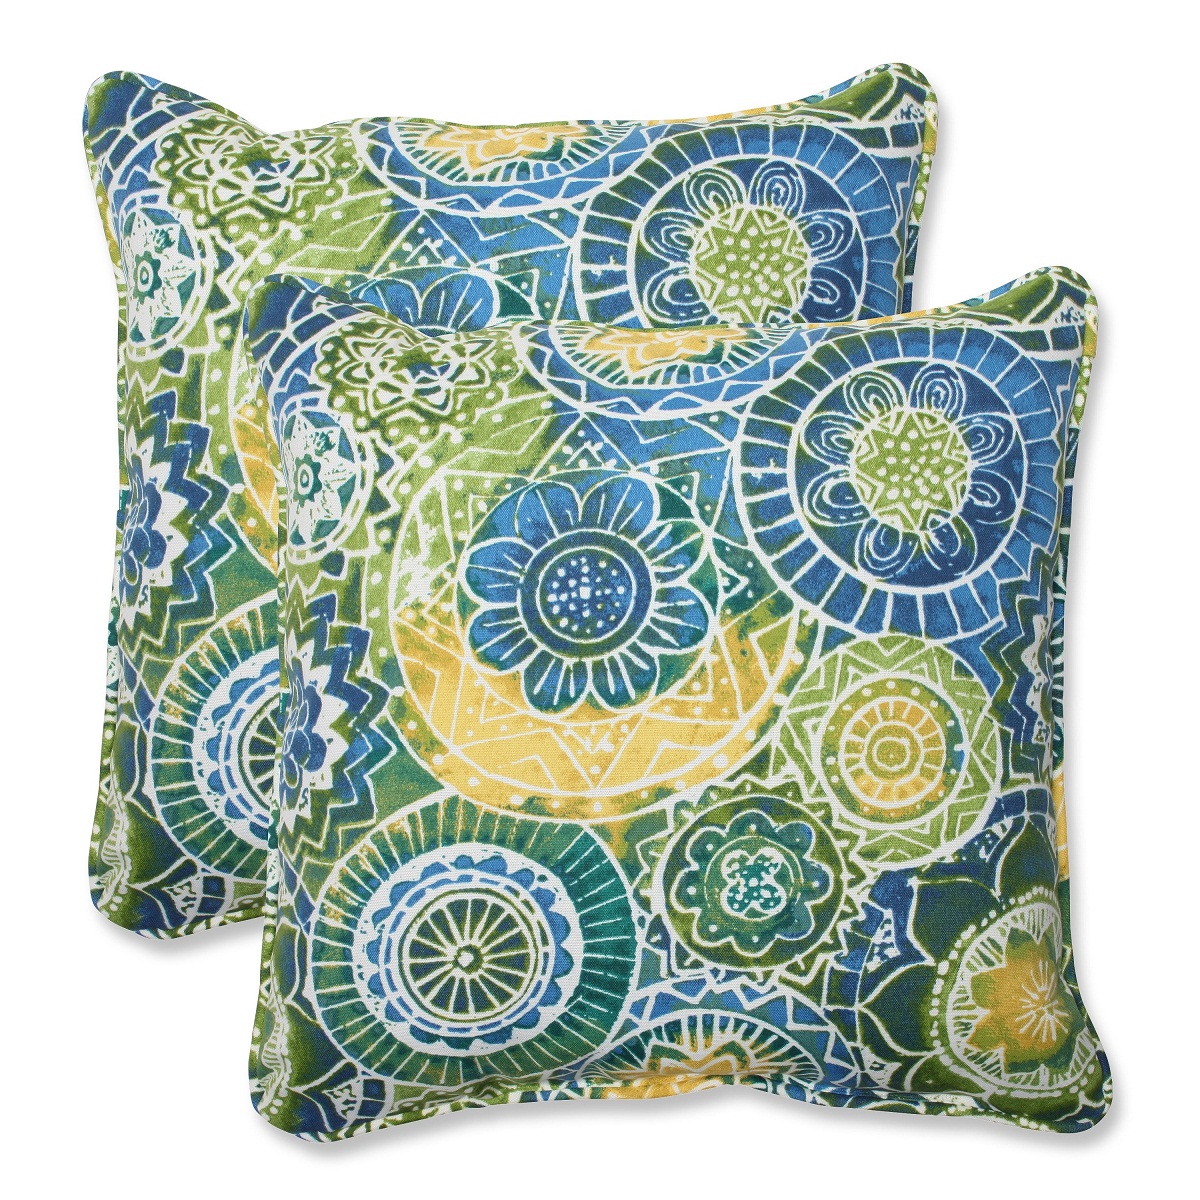 CC Outdoor Living Set of 2 Laguna Mosaico Blue, Green and Yellow Outdoor Corded Square Throw Pillows 18.5"